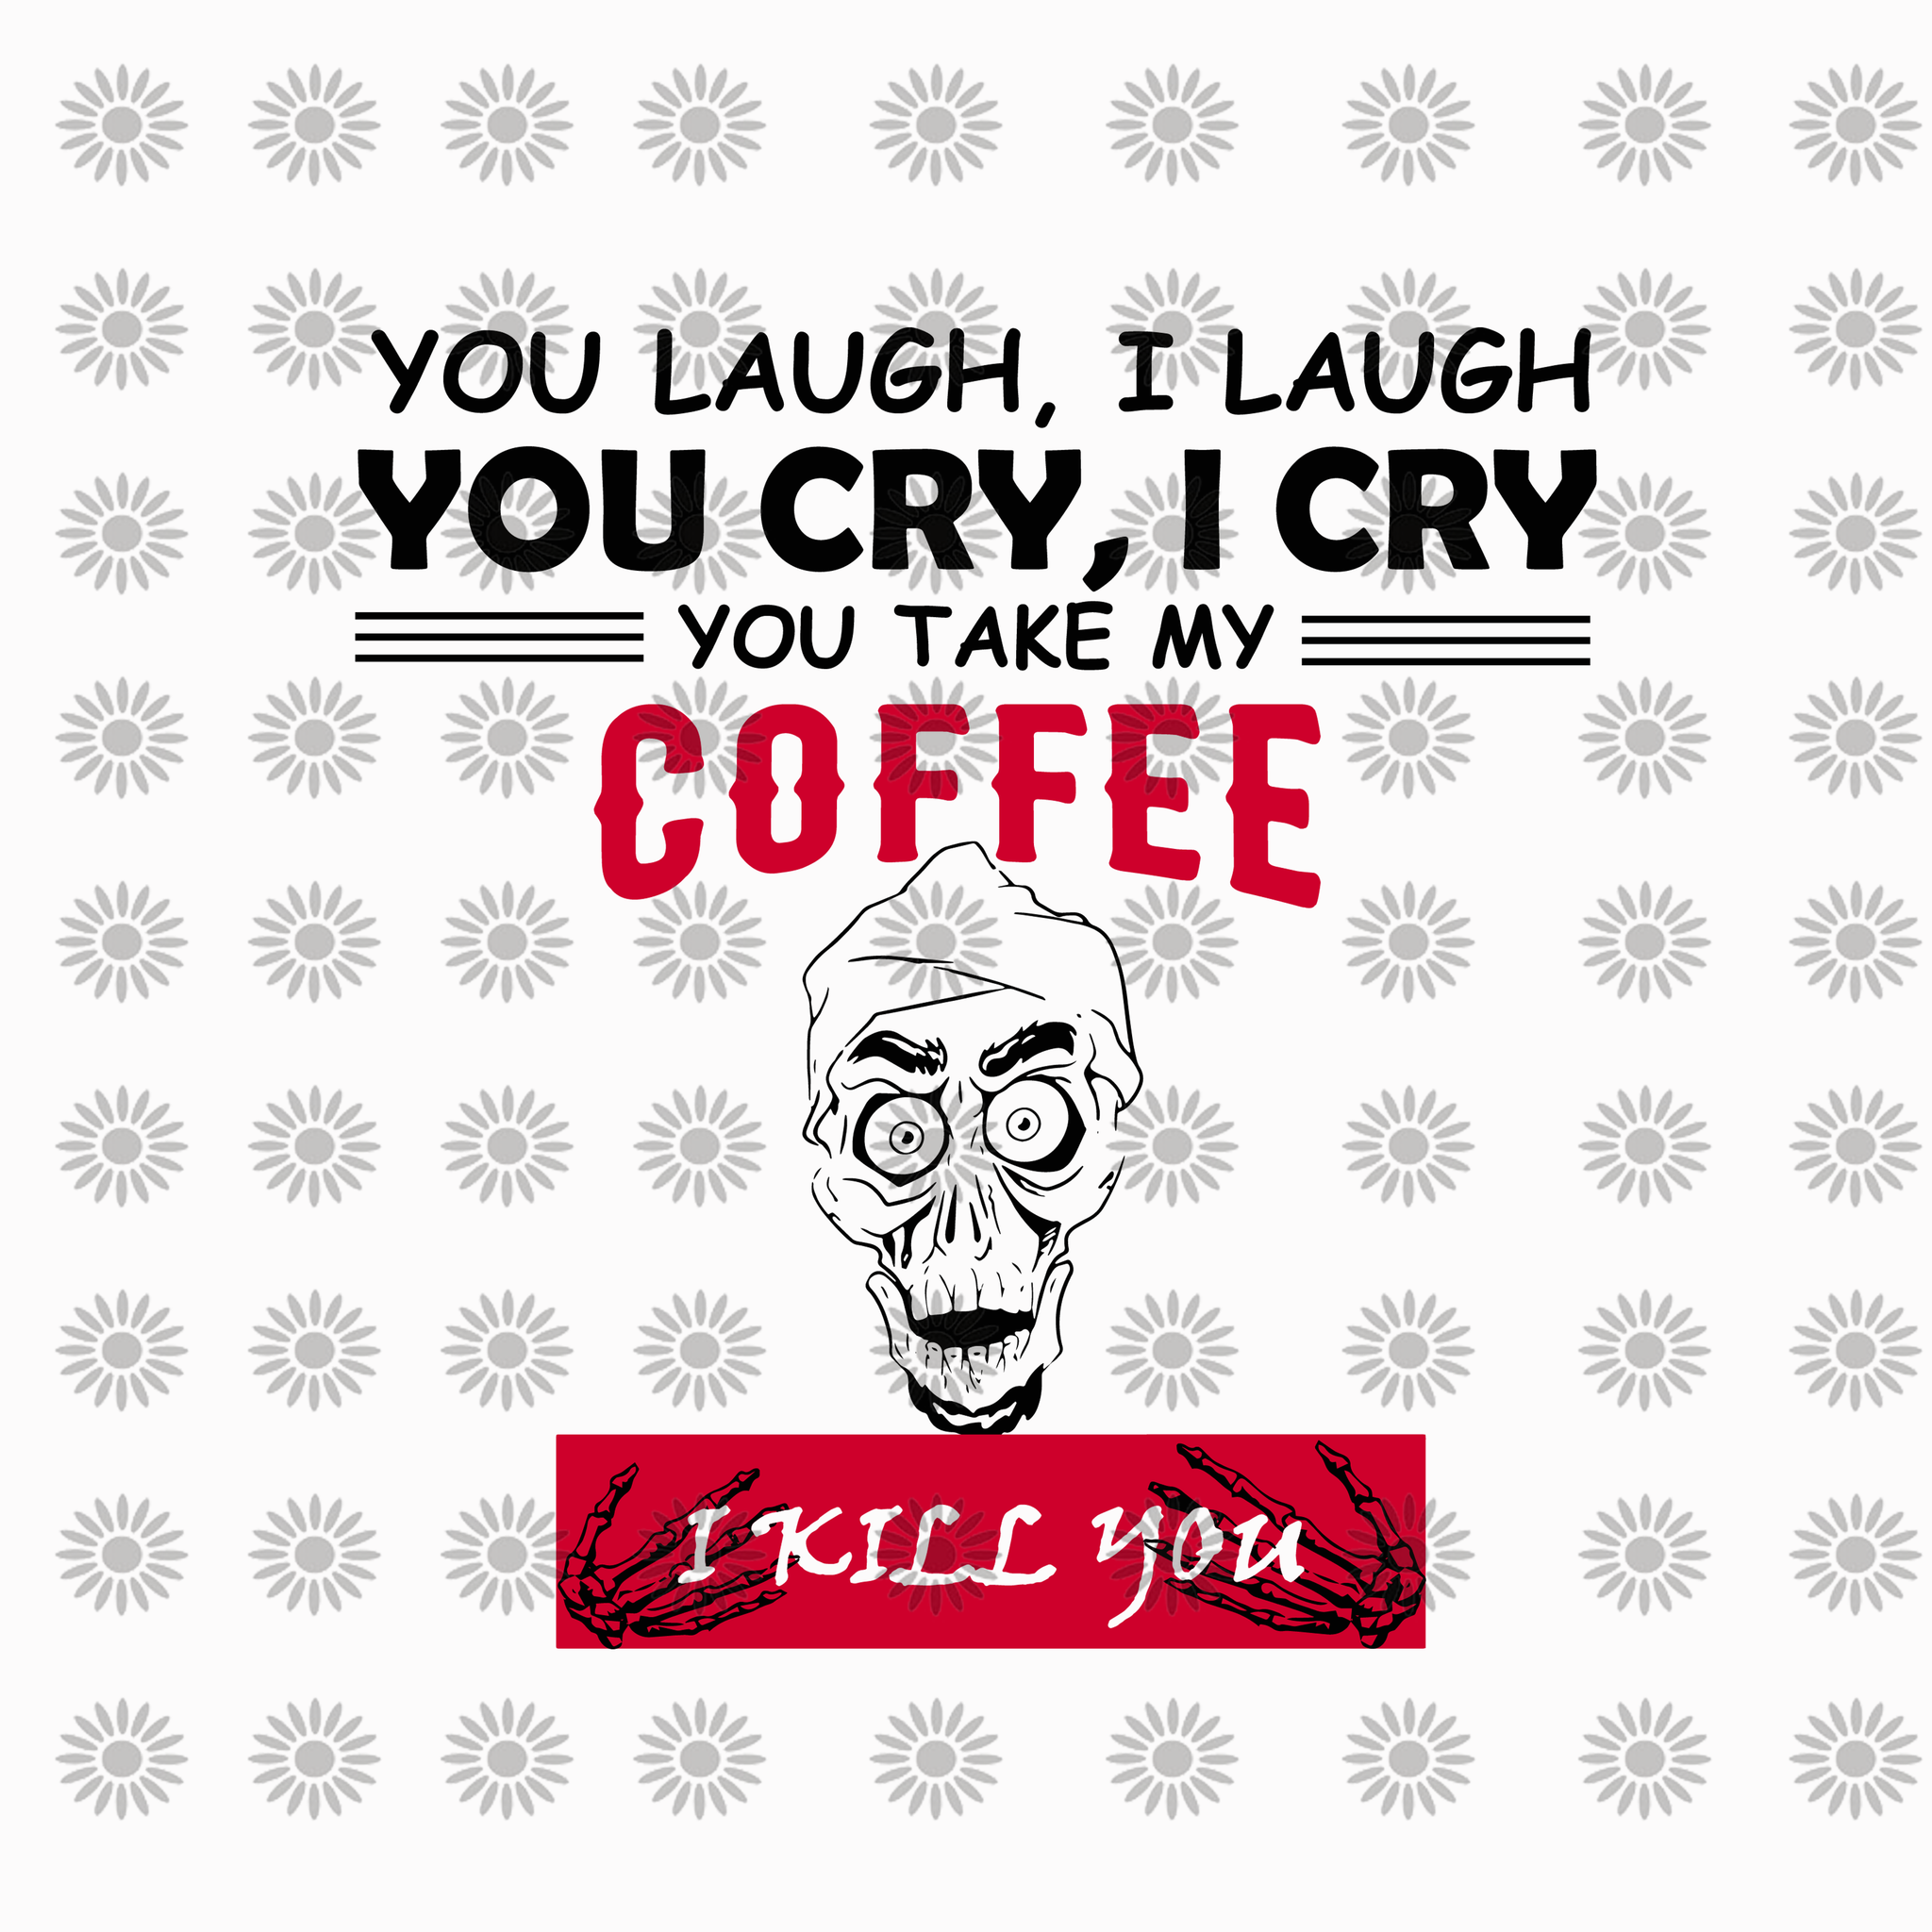 You laugh i laugh you cry i cry you take my coffee i kill you, funny quotes svg, png, eps, dxf file